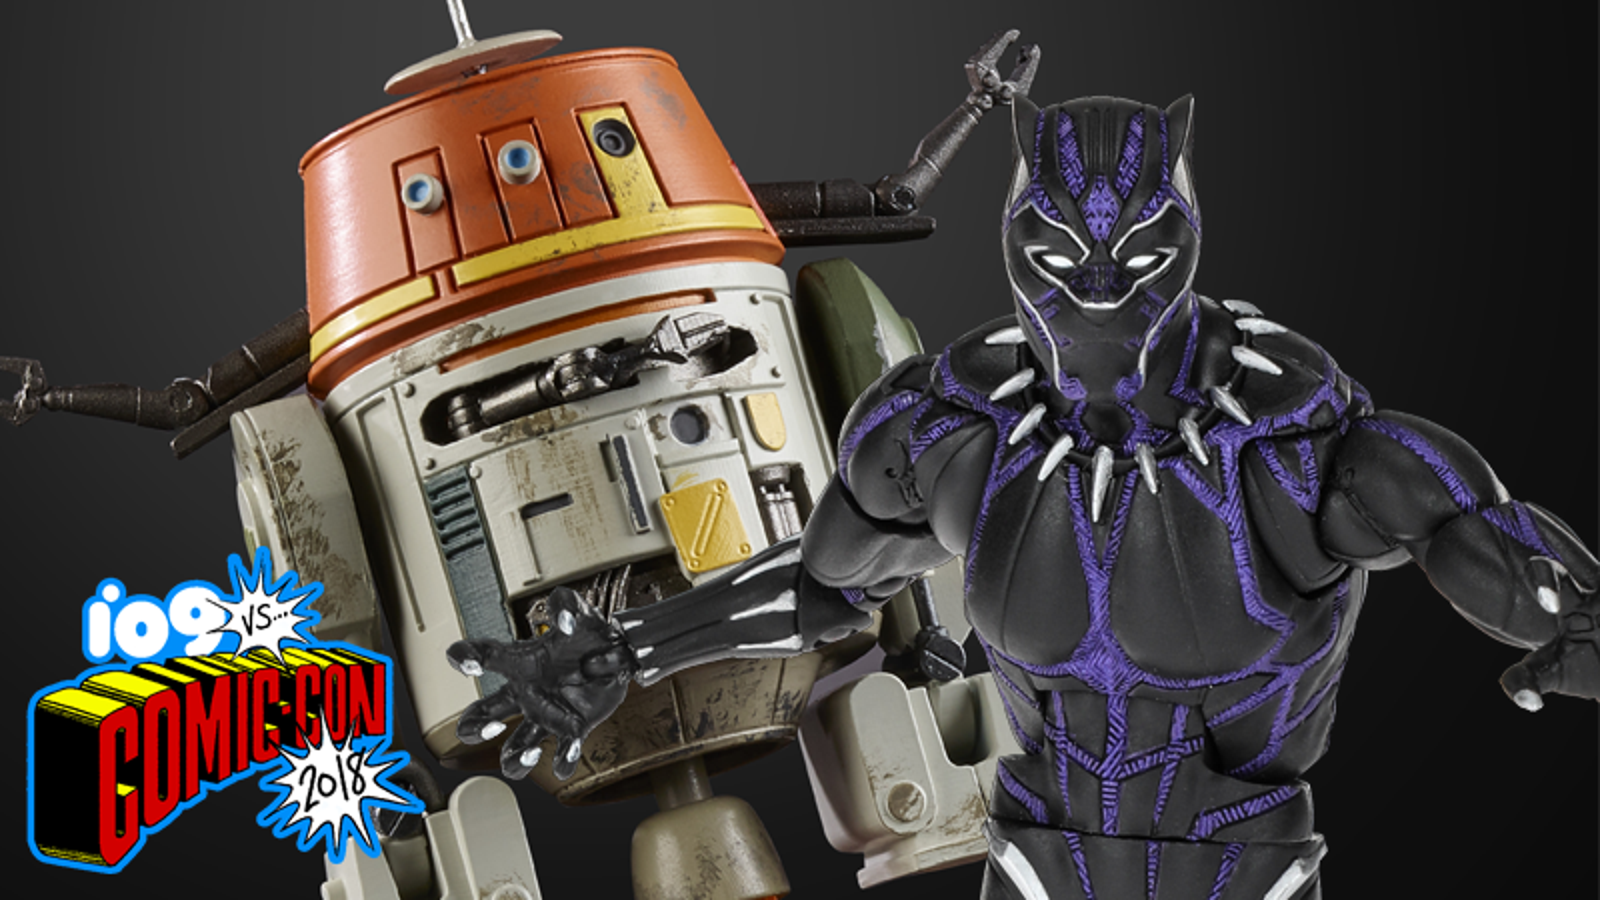 Get a Look at Hasbro's New Black Panther and Star Wars Toys